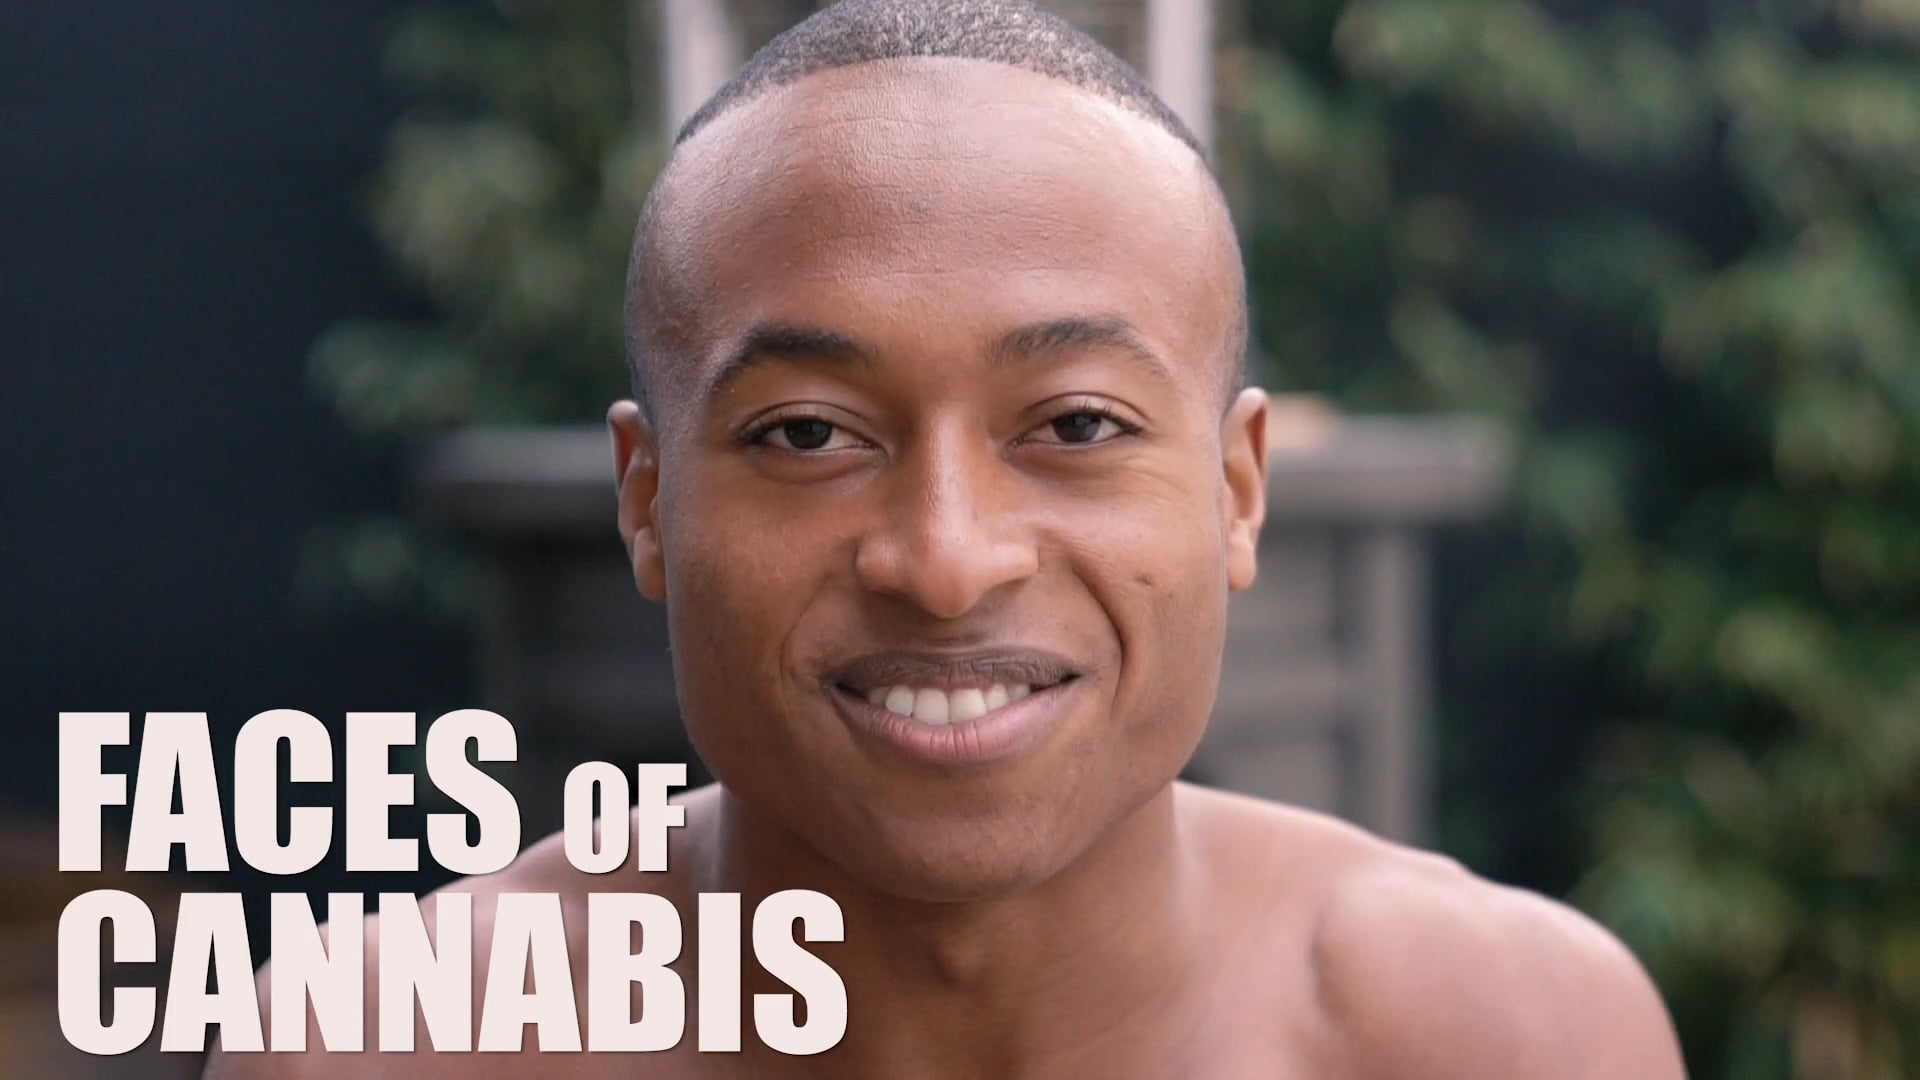 Faces of Cannabis - Episode: Andrew 7 Seally